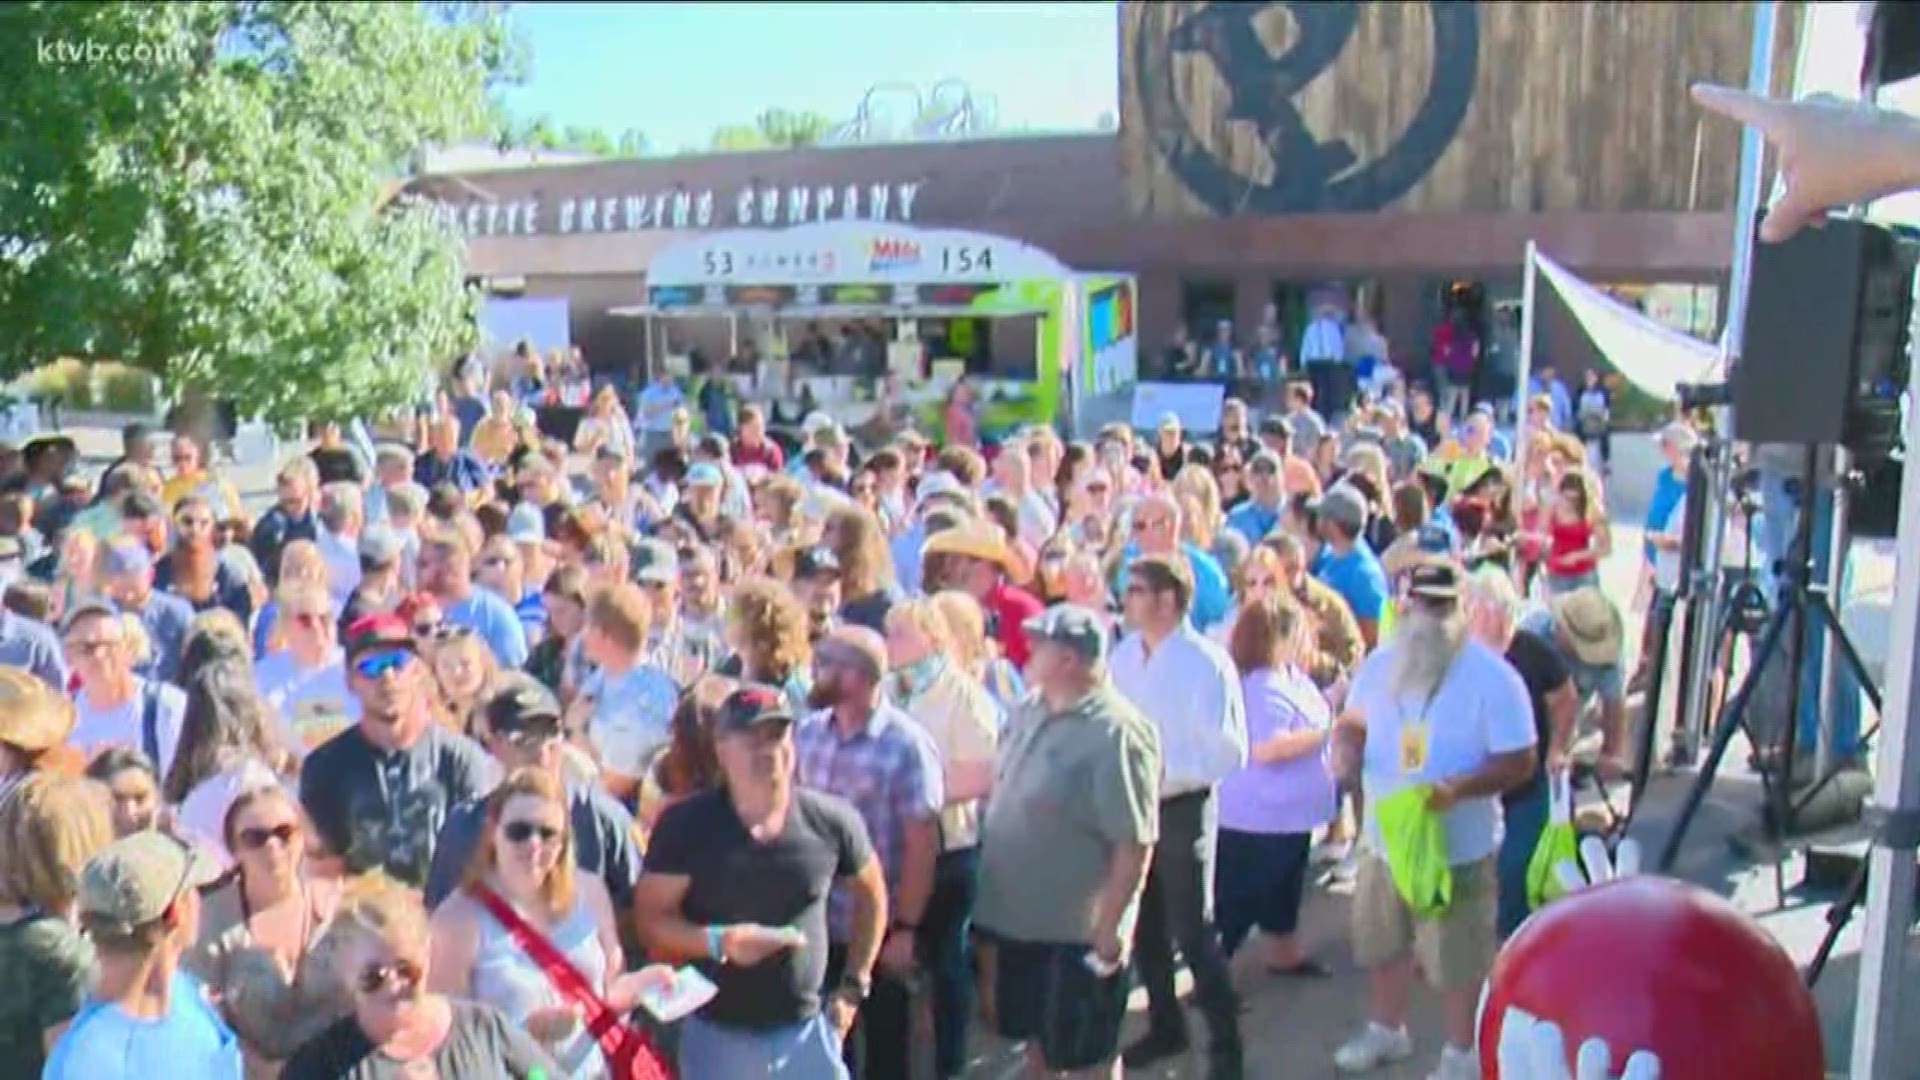 Since the Idaho Lottery was started in 1989, over $900,000,000 has been raised for Idaho public schools. And to celebrate its 30th birthday, hundreds gathered at Payette Brewing to break the world record of most scratchers scratched at once.